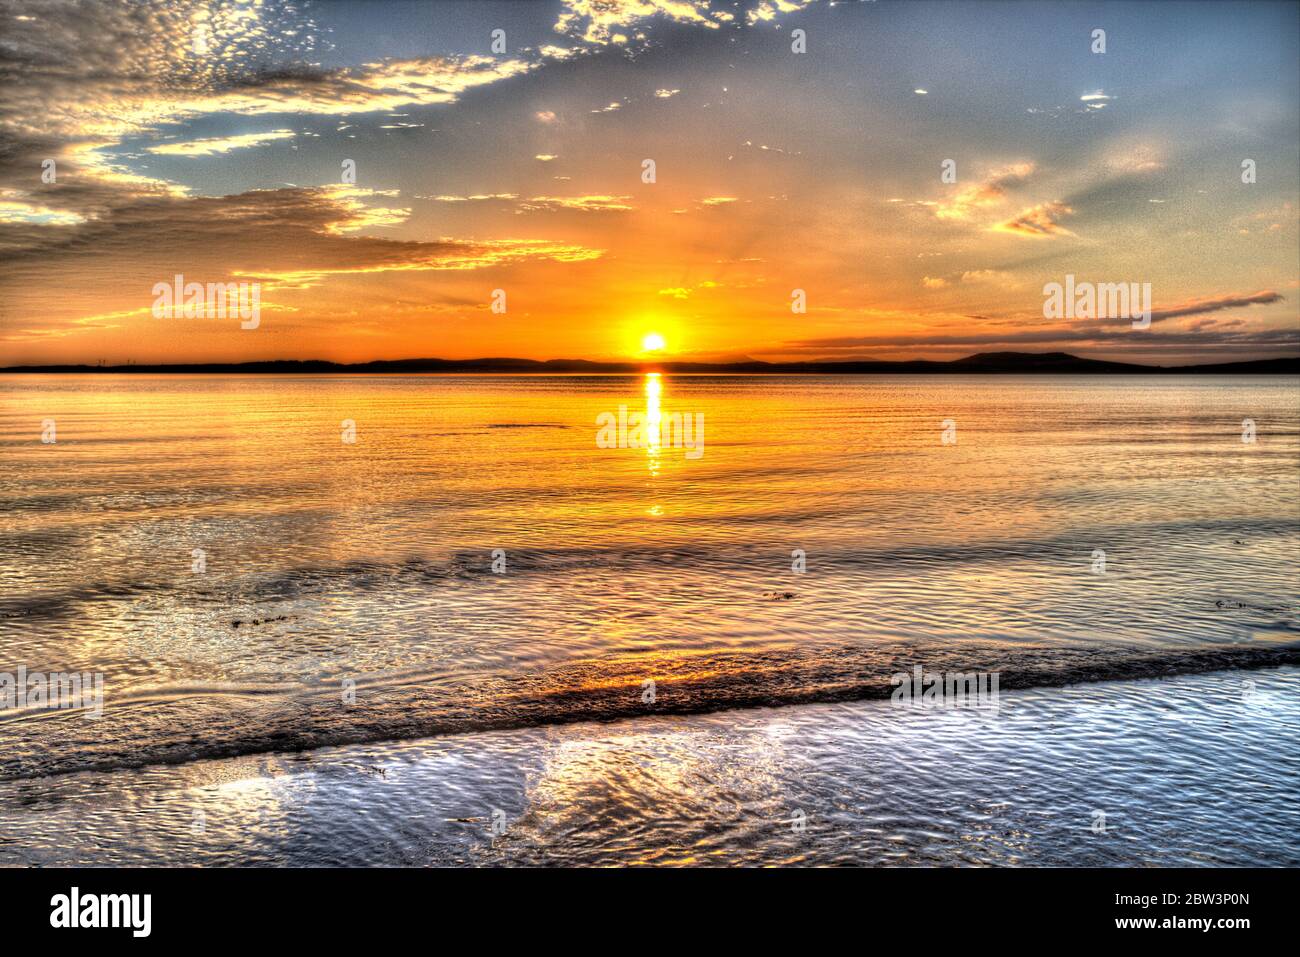 Isle of Gigha, Scotland. Artistic view of sunset over the Sound of Gigha, with the Isle of Gigha in the background. Stock Photo